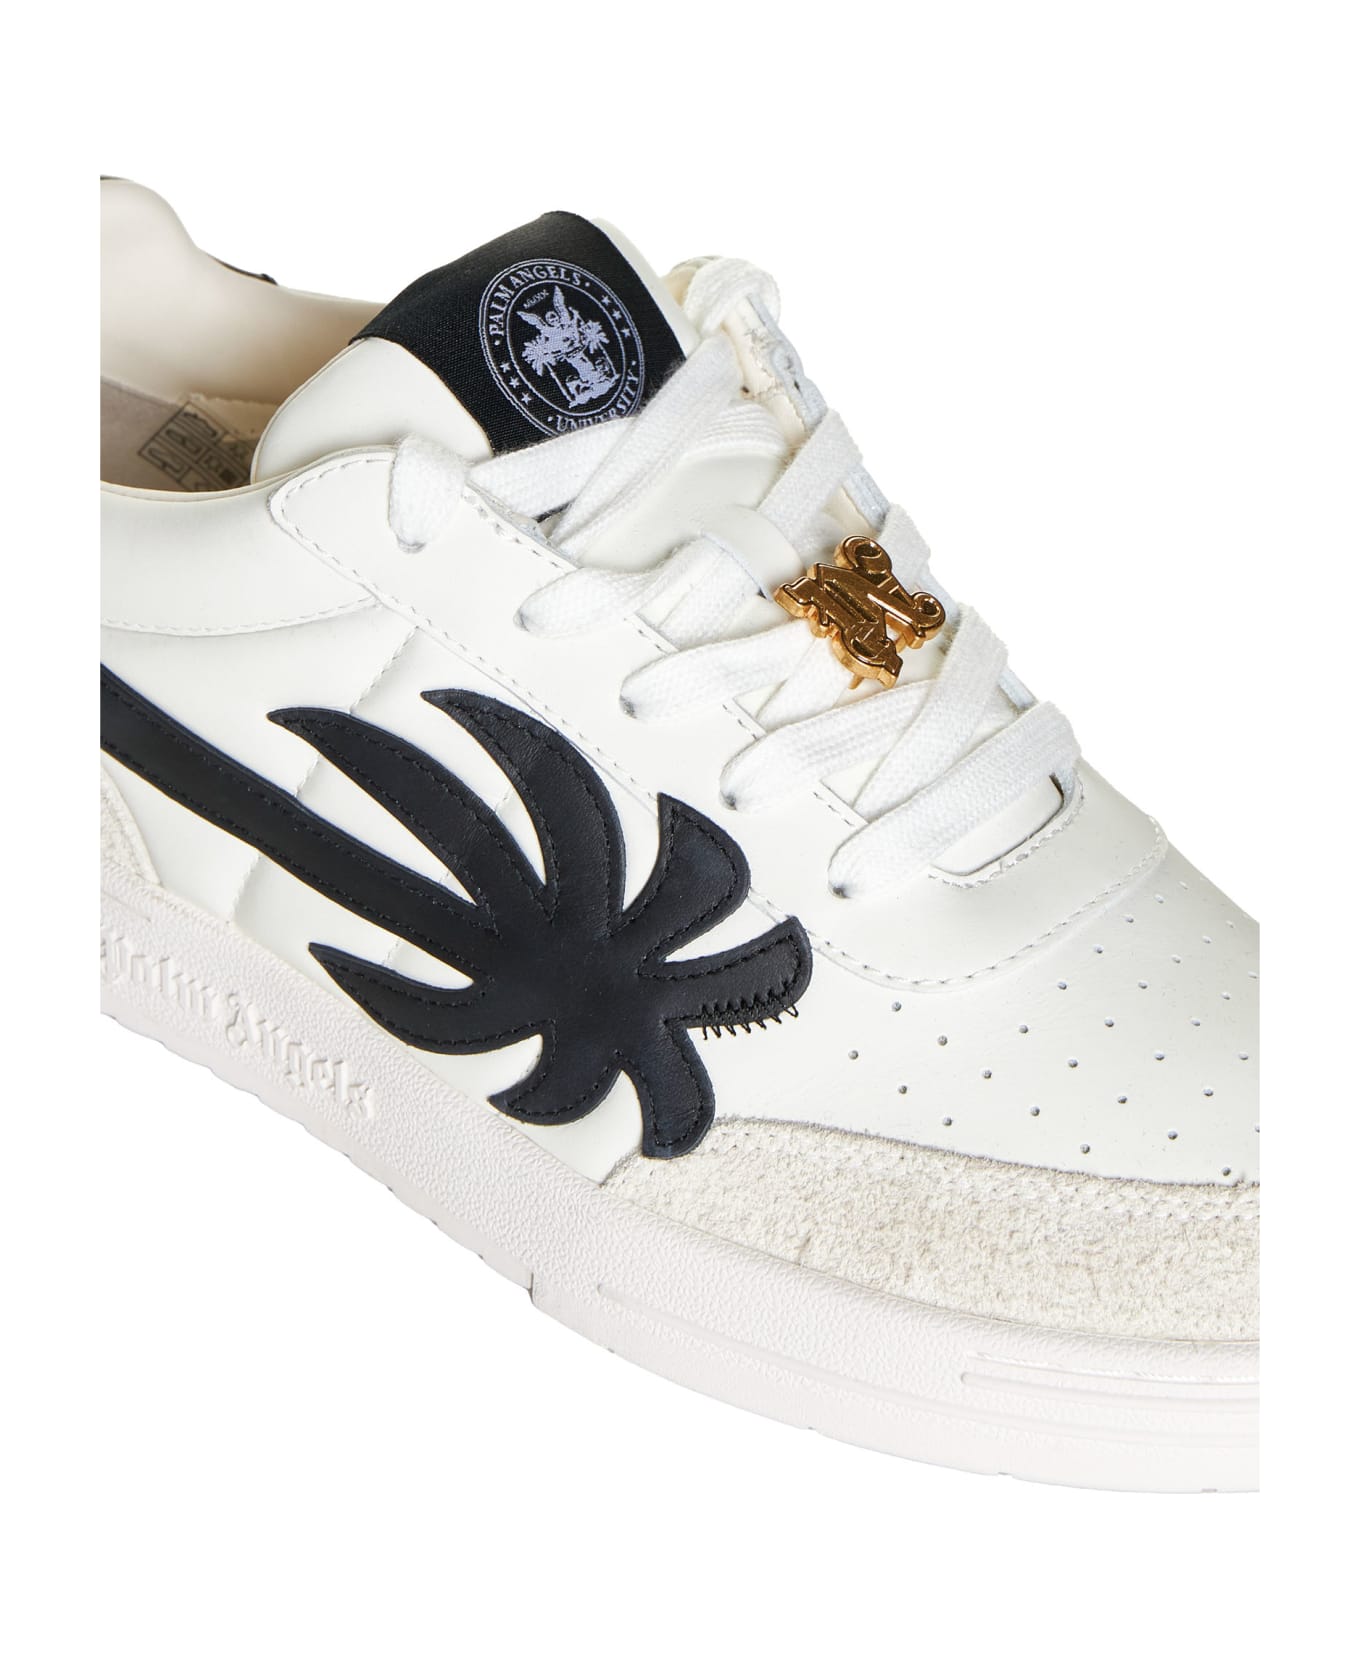 Palm Angels 'palm Beach University' White Leather Sneakers - White BLACK